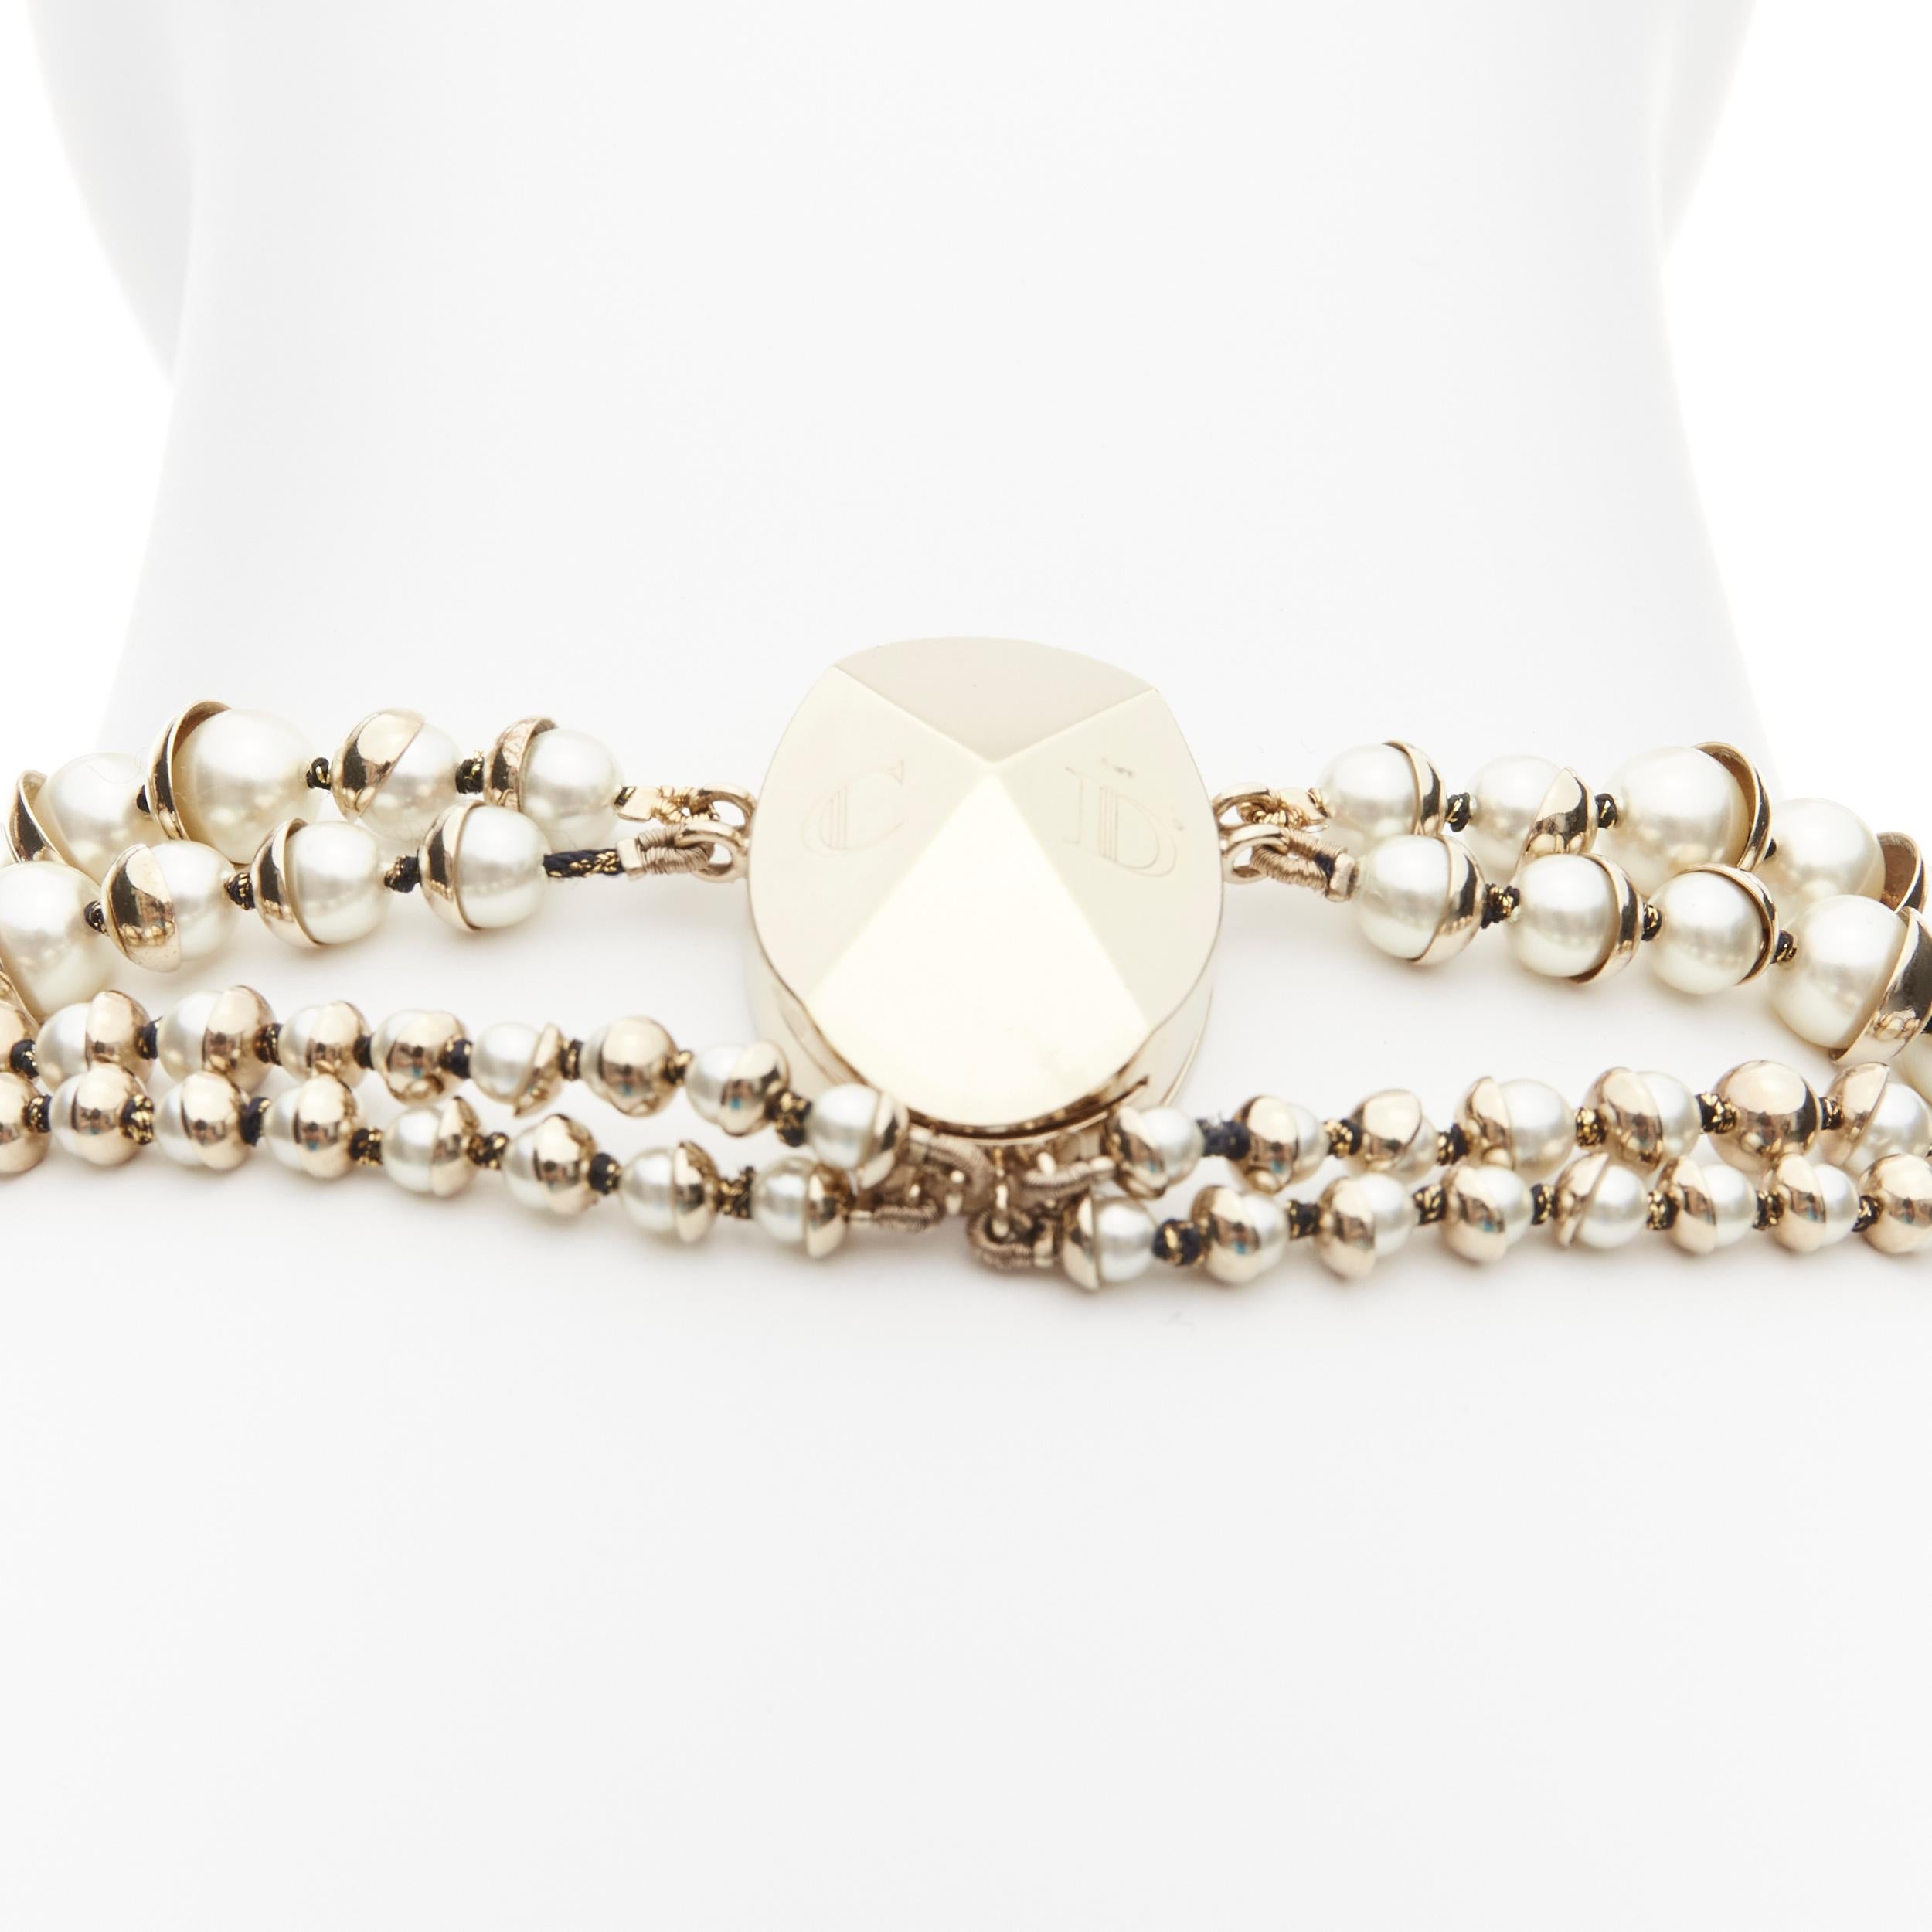 CHRISTIAN DIOR Galliano Vintage faux pearl gold tone CD clasp tribal layered necklace
Reference: TGAS/D00243
Brand: Christian Dior
Designer: John Galliano
Material: Faux Pearl, Metal
Color: Pearl, Gold
Pattern: Solid
Closure: Magnet
Extra Details: